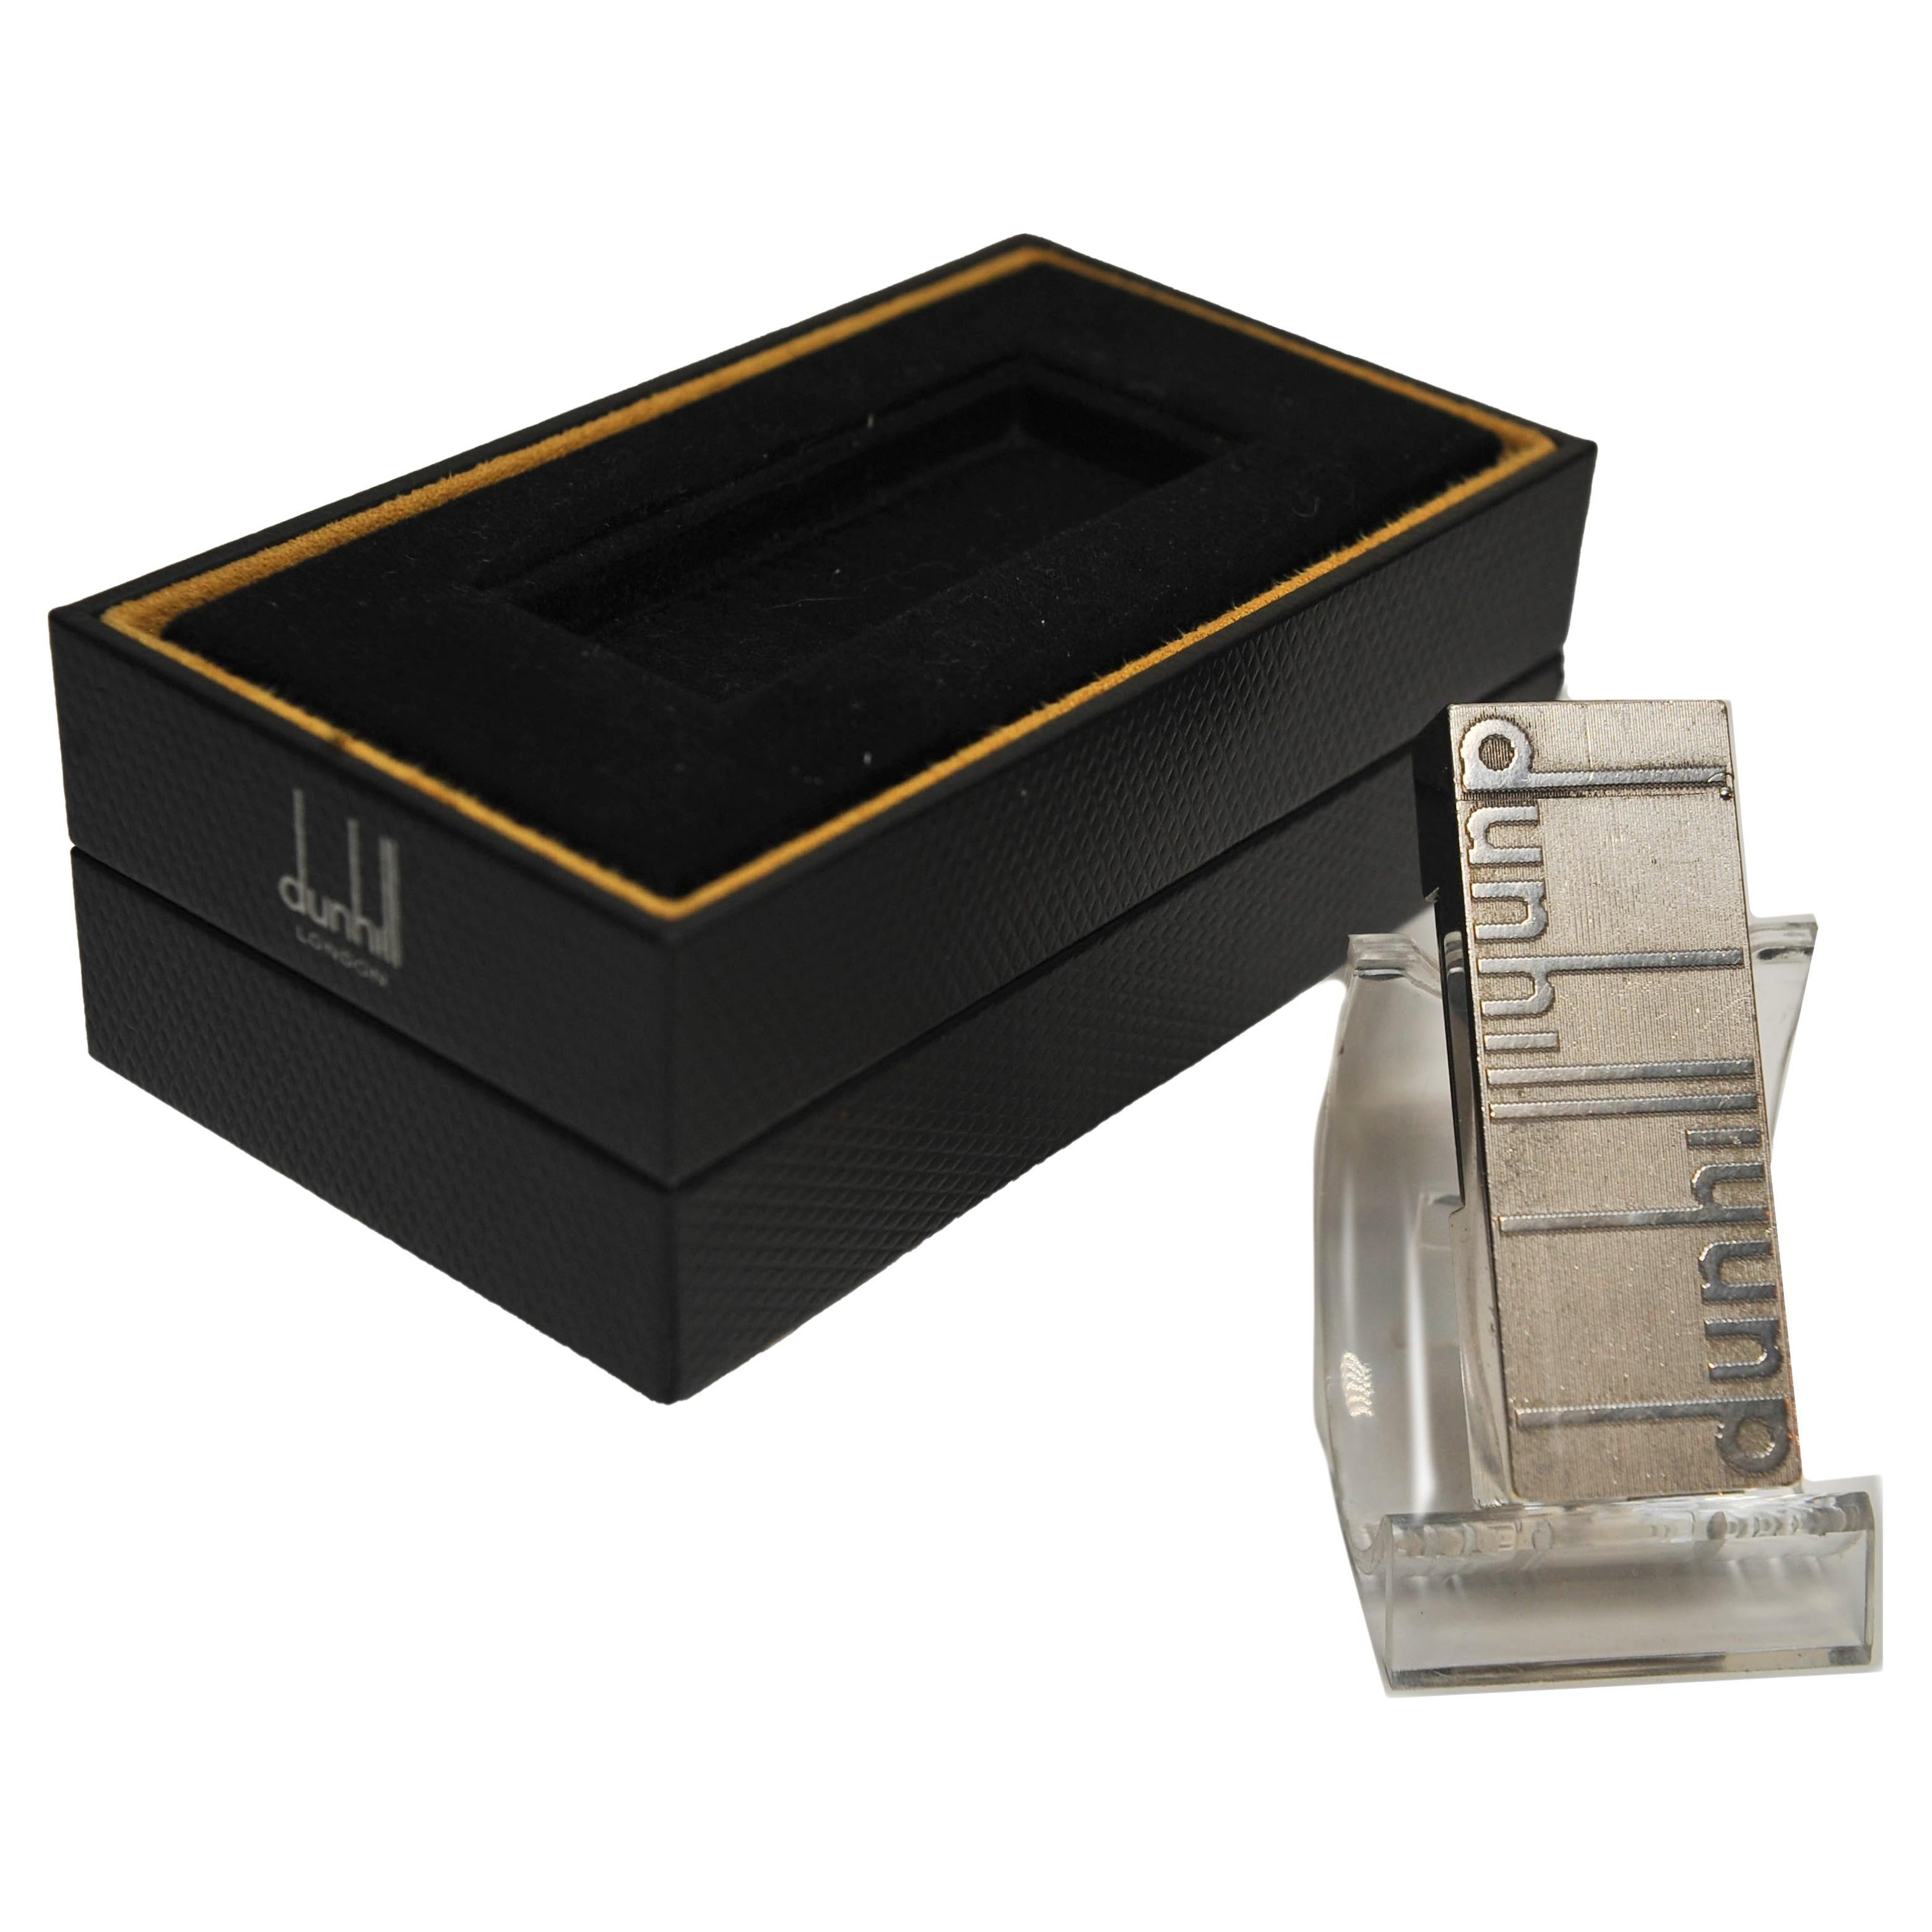 Dunhill of London Longtail Logo Rollgas Cigarette Lighter With Dunhill Box For Sale